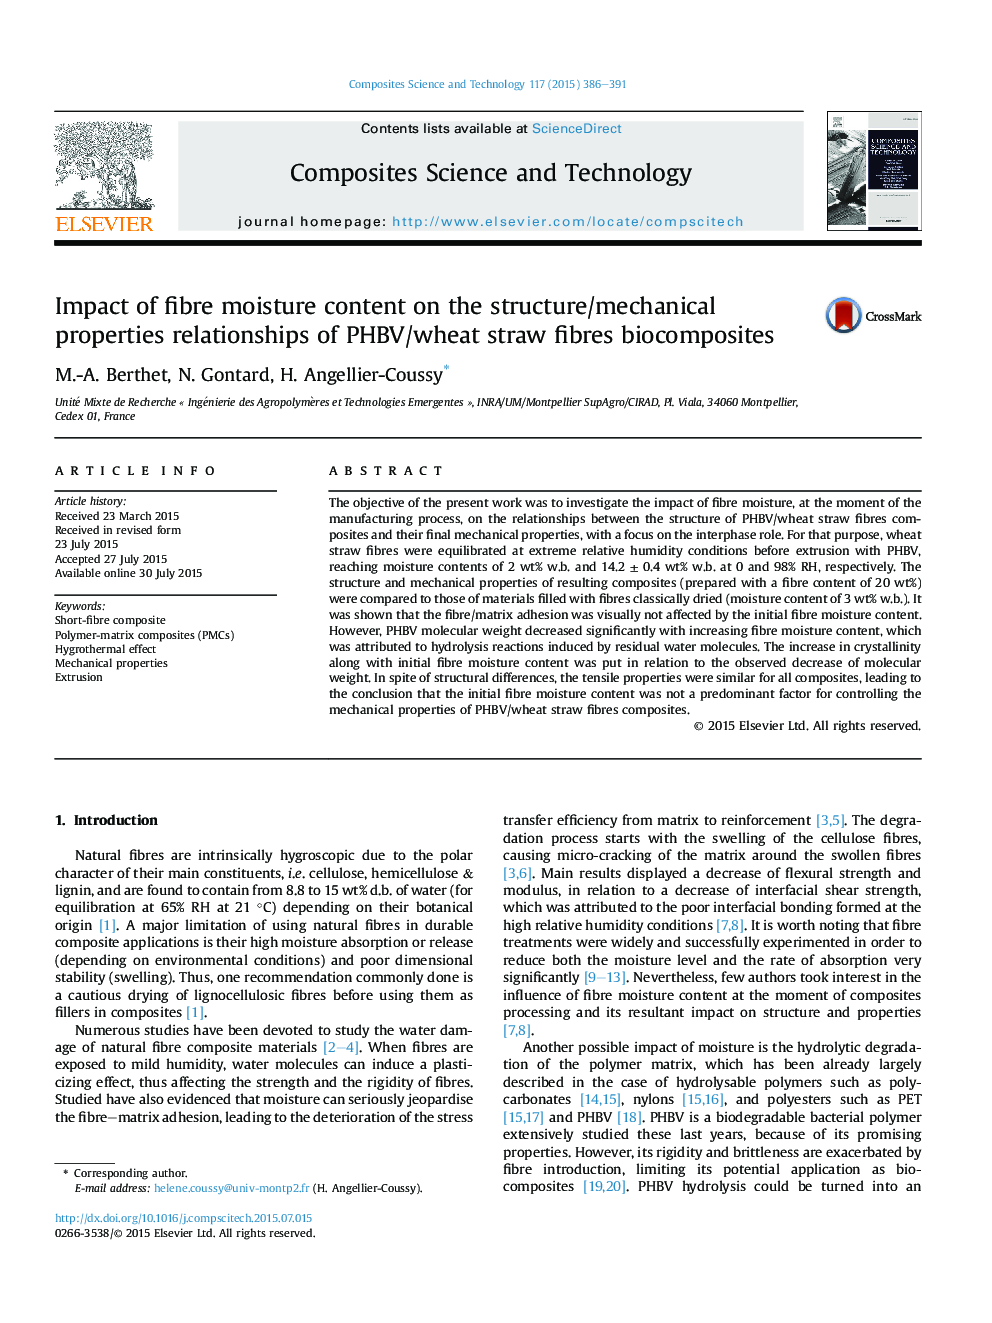 Impact of fibre moisture content on the structure/mechanical properties relationships of PHBV/wheat straw fibres biocomposites